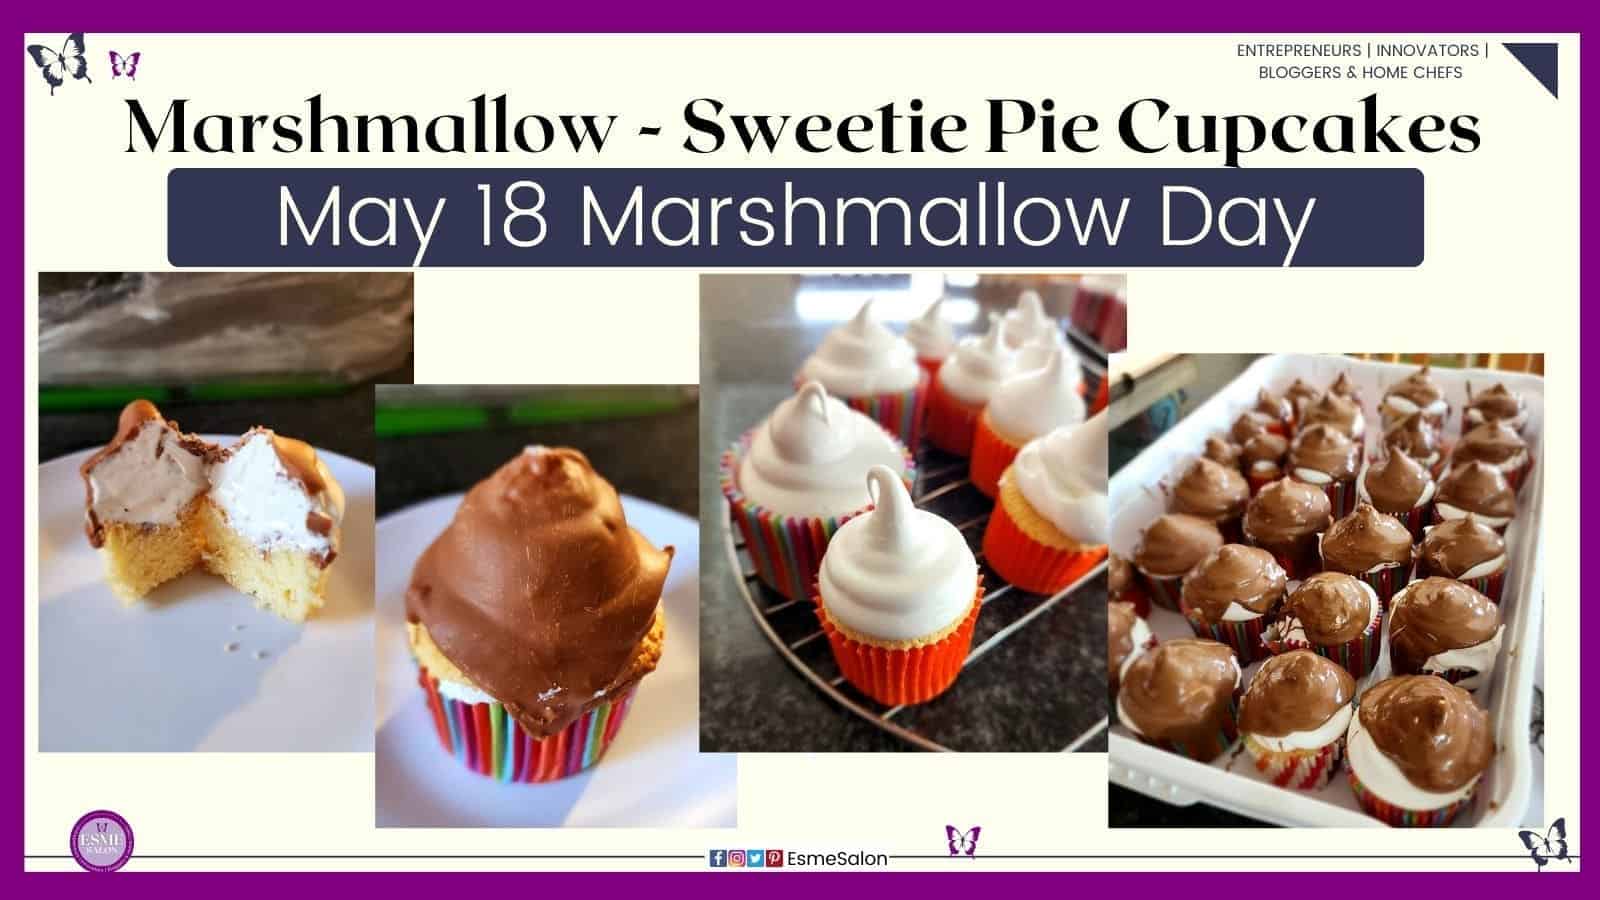 an image of a cupcake with a marshmallow topping - sweetie pie and some dipped in chocolate